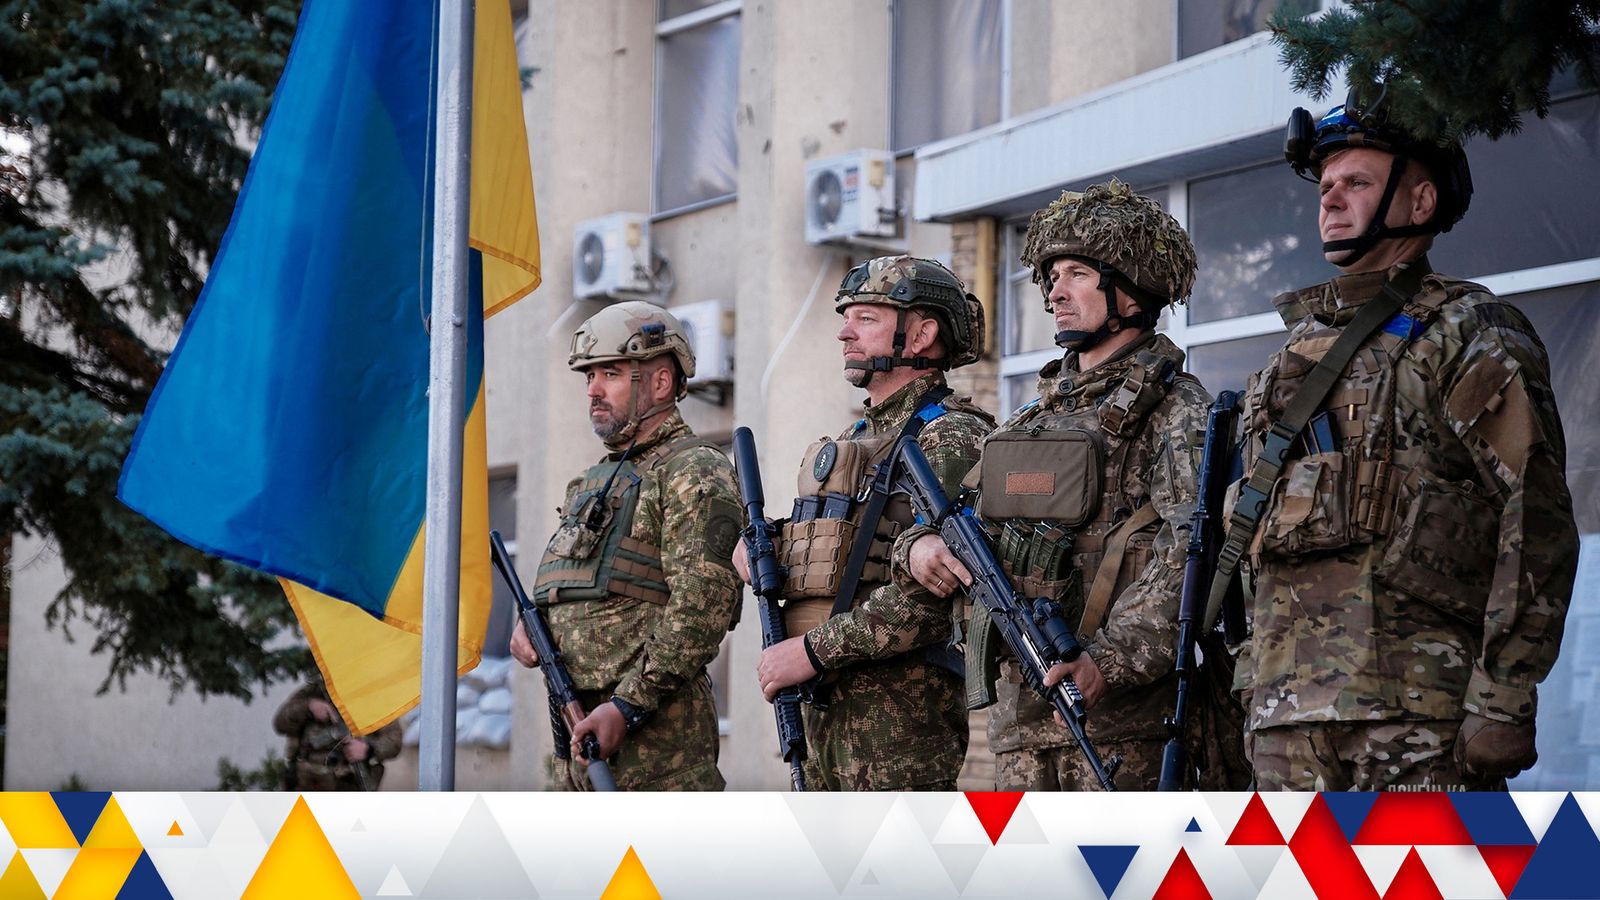 Public urged to 'remember Ukraine's fight for freedom' on Armistice Day